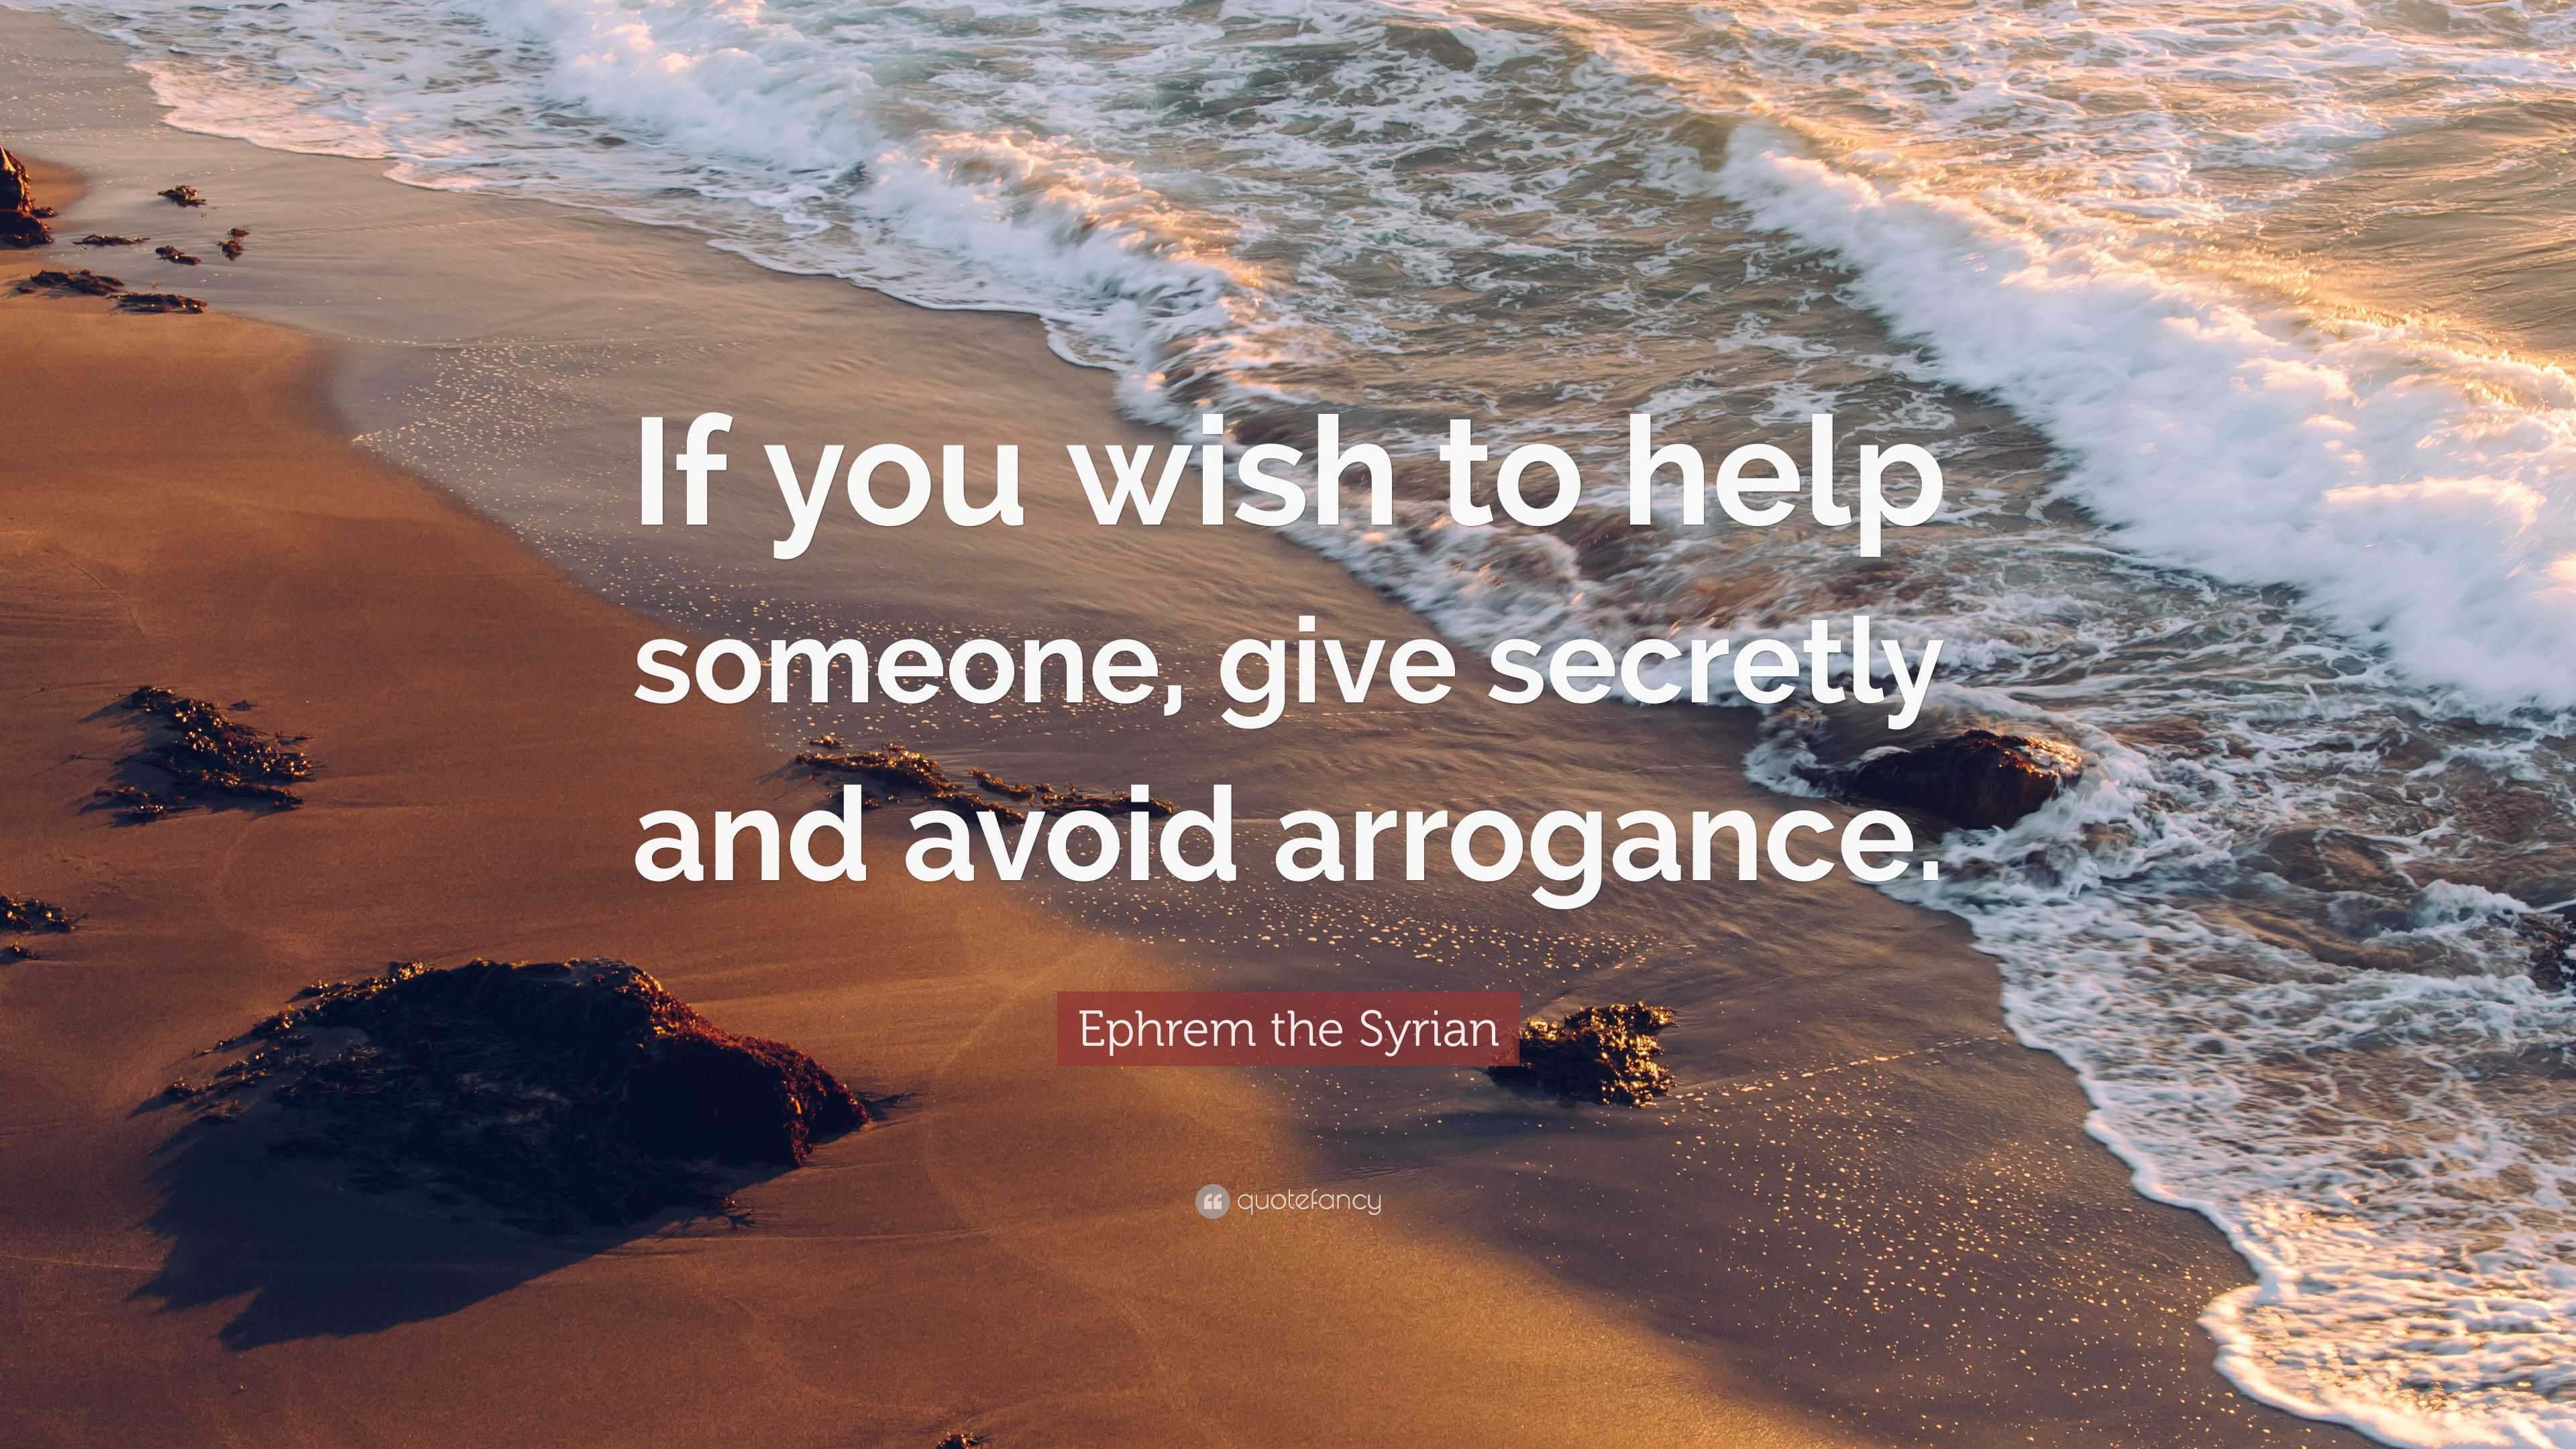 Ephrem the Syrian Quote: "If you wish to help someone, give secretly and avoid arrogance." (9 ...